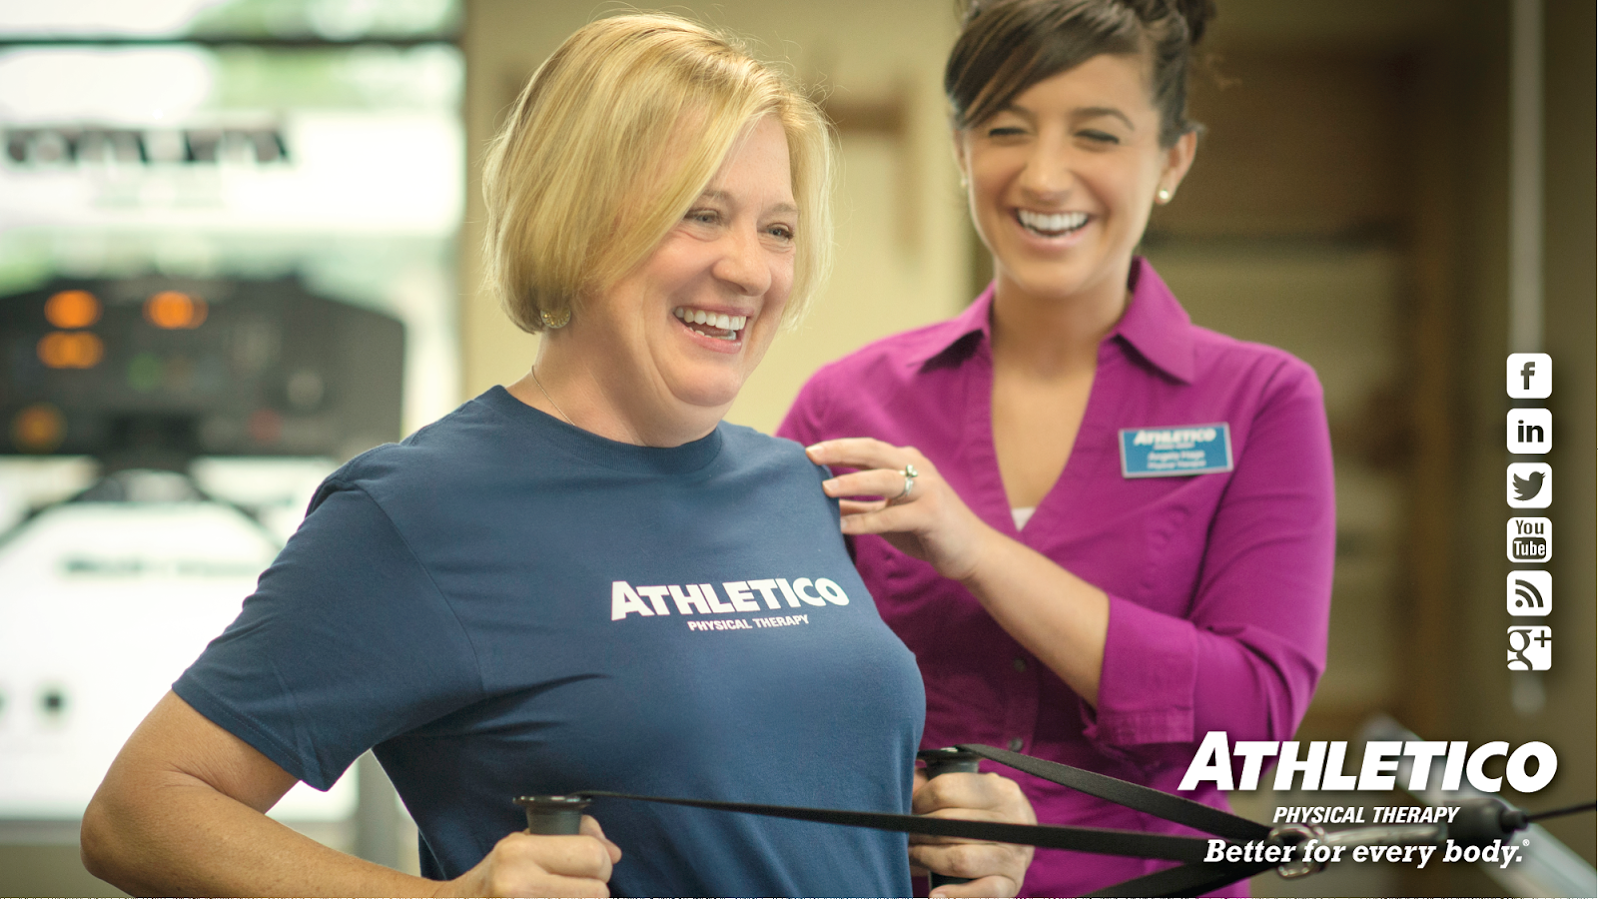 Athletico Physical Therapy - Raymore 2007 W Foxwood Dr #d, Raymore Missouri 64083